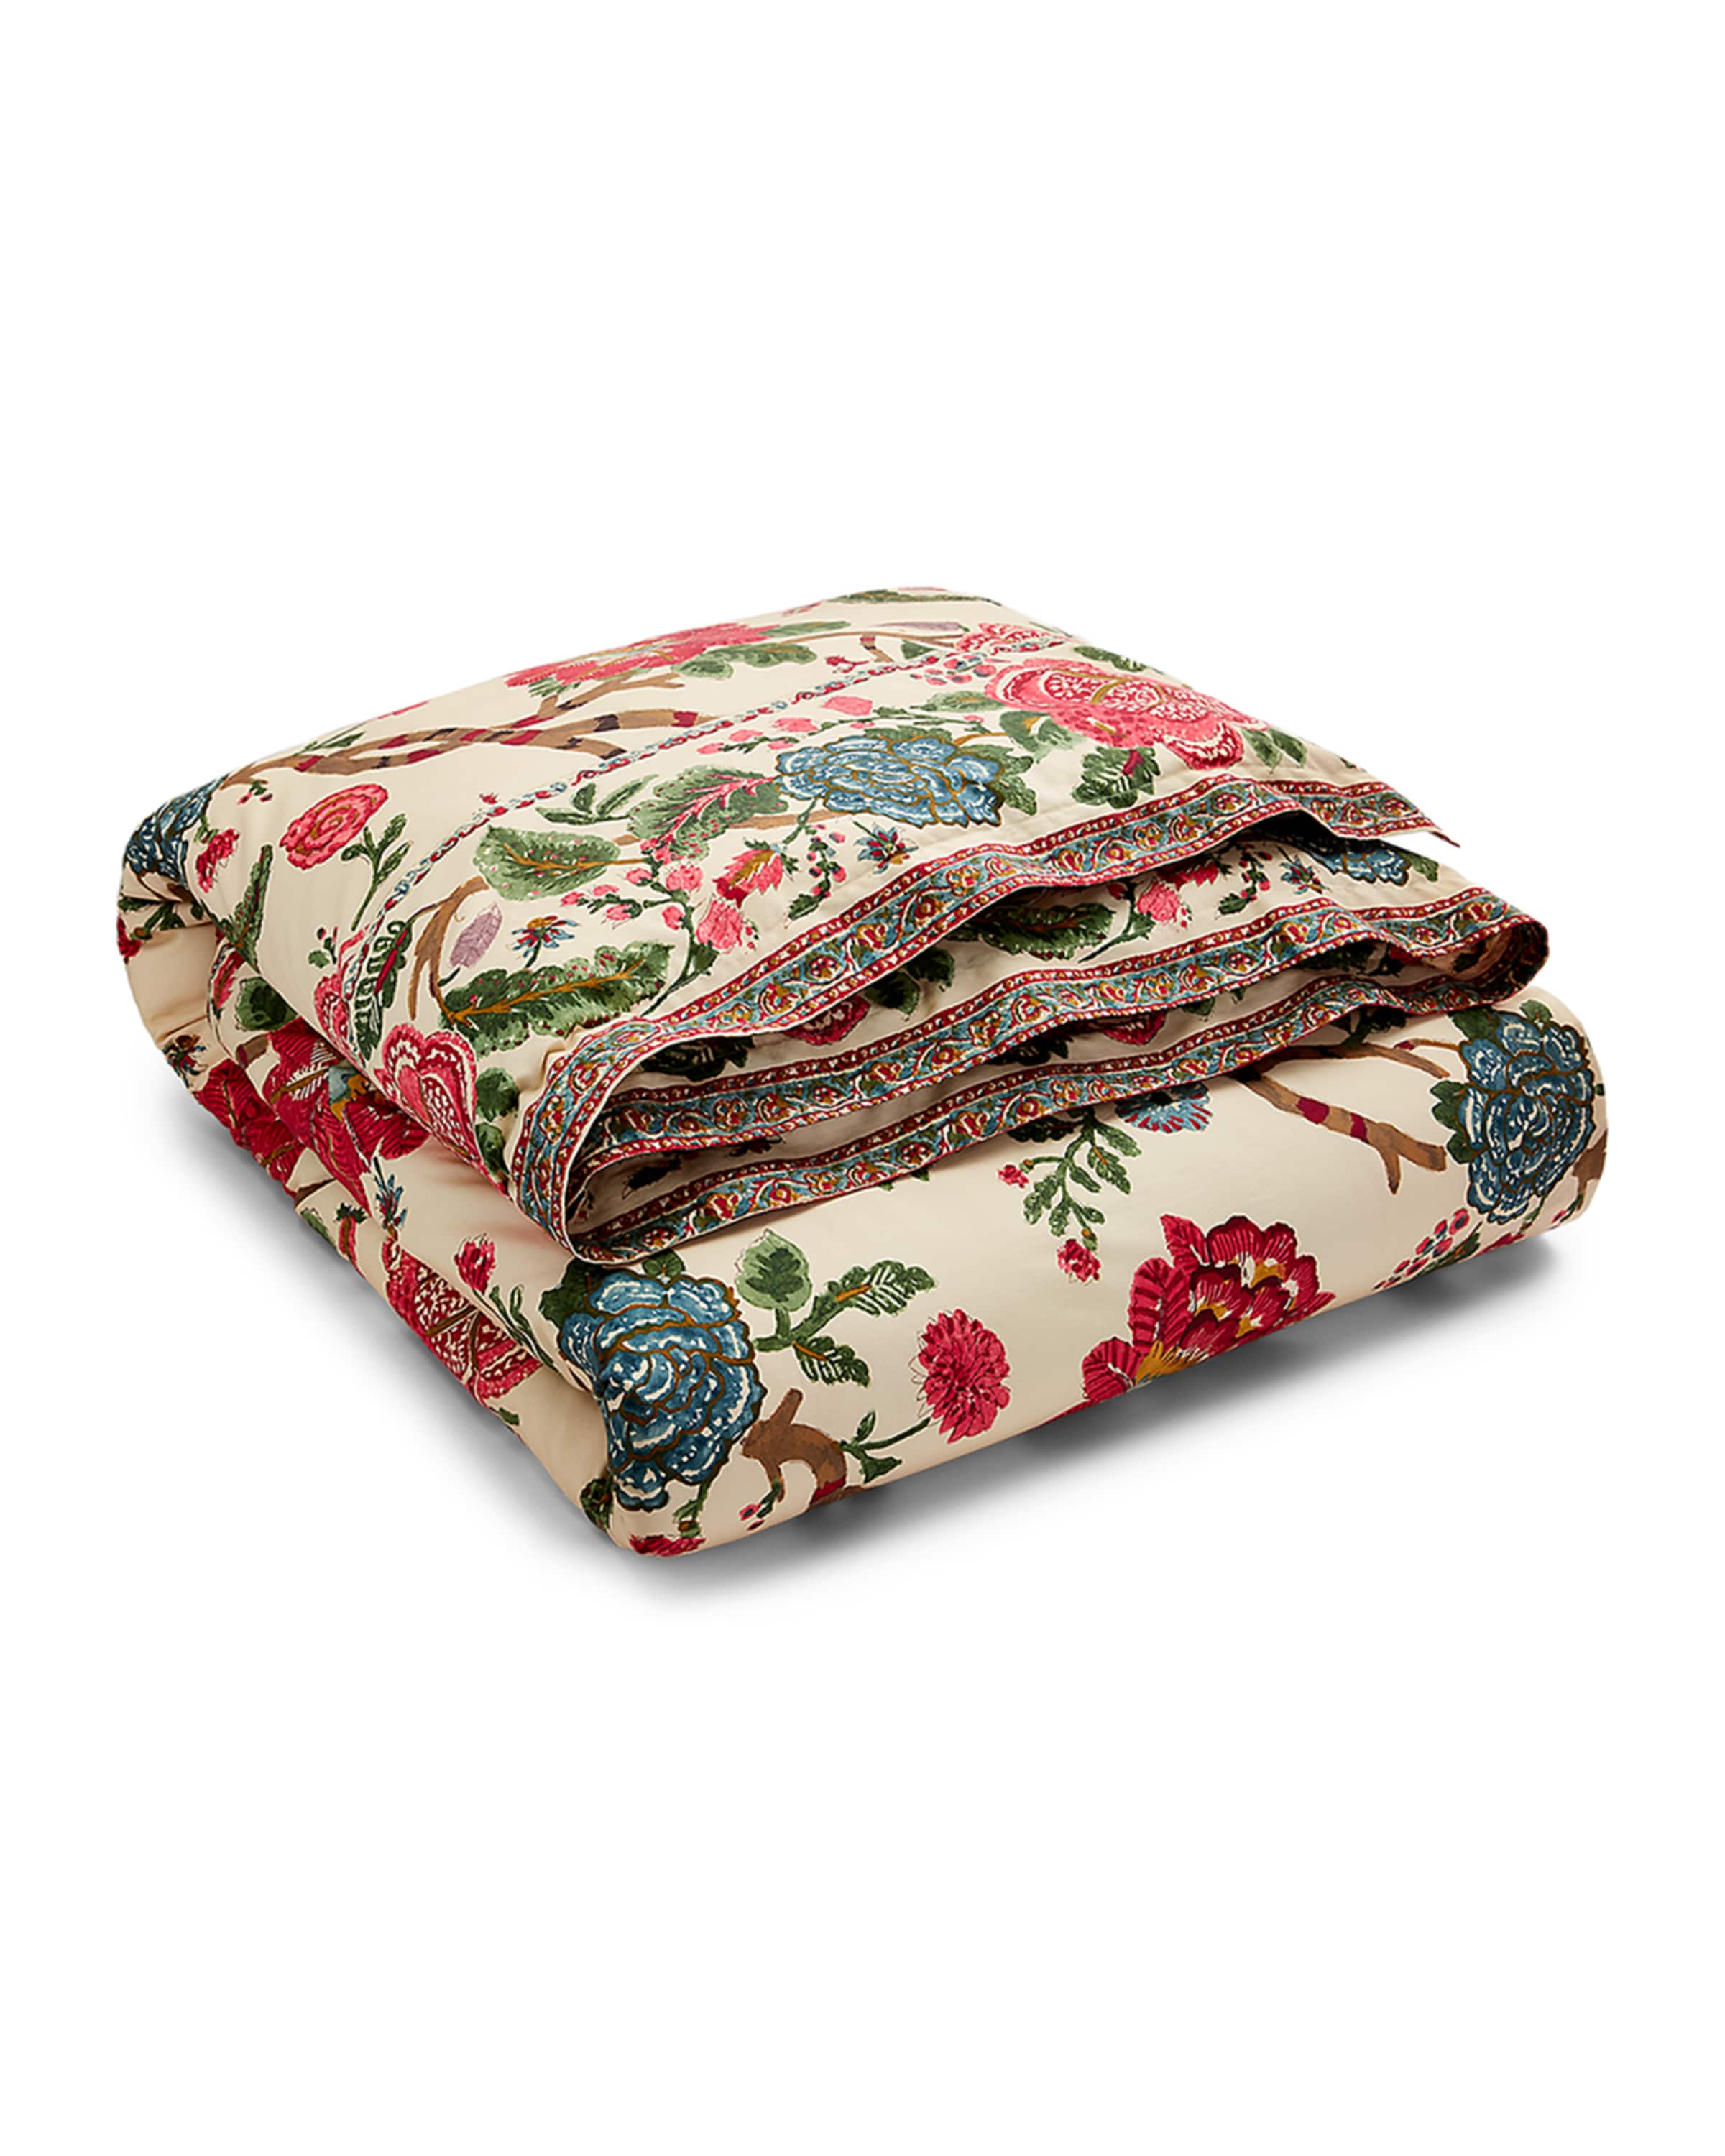 Ralph Lauren Home Teagan Floral King Comforter and Matching Items &  Matching Items | Horchow